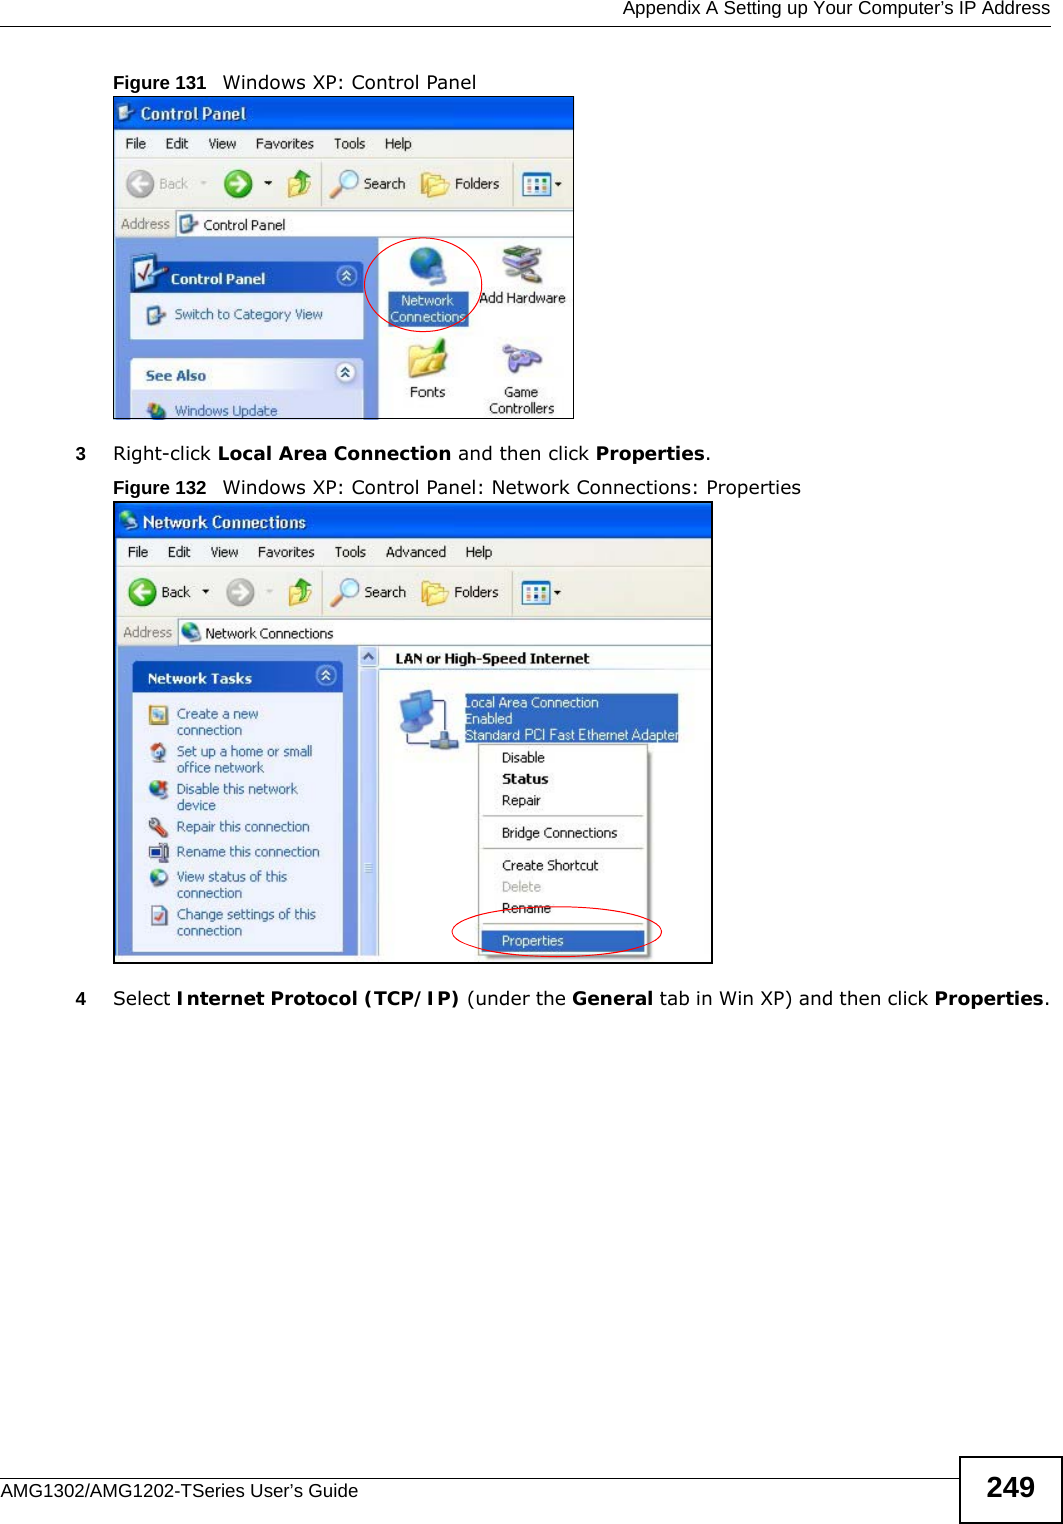  Appendix A Setting up Your Computer’s IP AddressAMG1302/AMG1202-TSeries User’s Guide 249Figure 131   Windows XP: Control Panel3Right-click Local Area Connection and then click Properties.Figure 132   Windows XP: Control Panel: Network Connections: Properties4Select Internet Protocol (TCP/IP) (under the General tab in Win XP) and then click Properties.